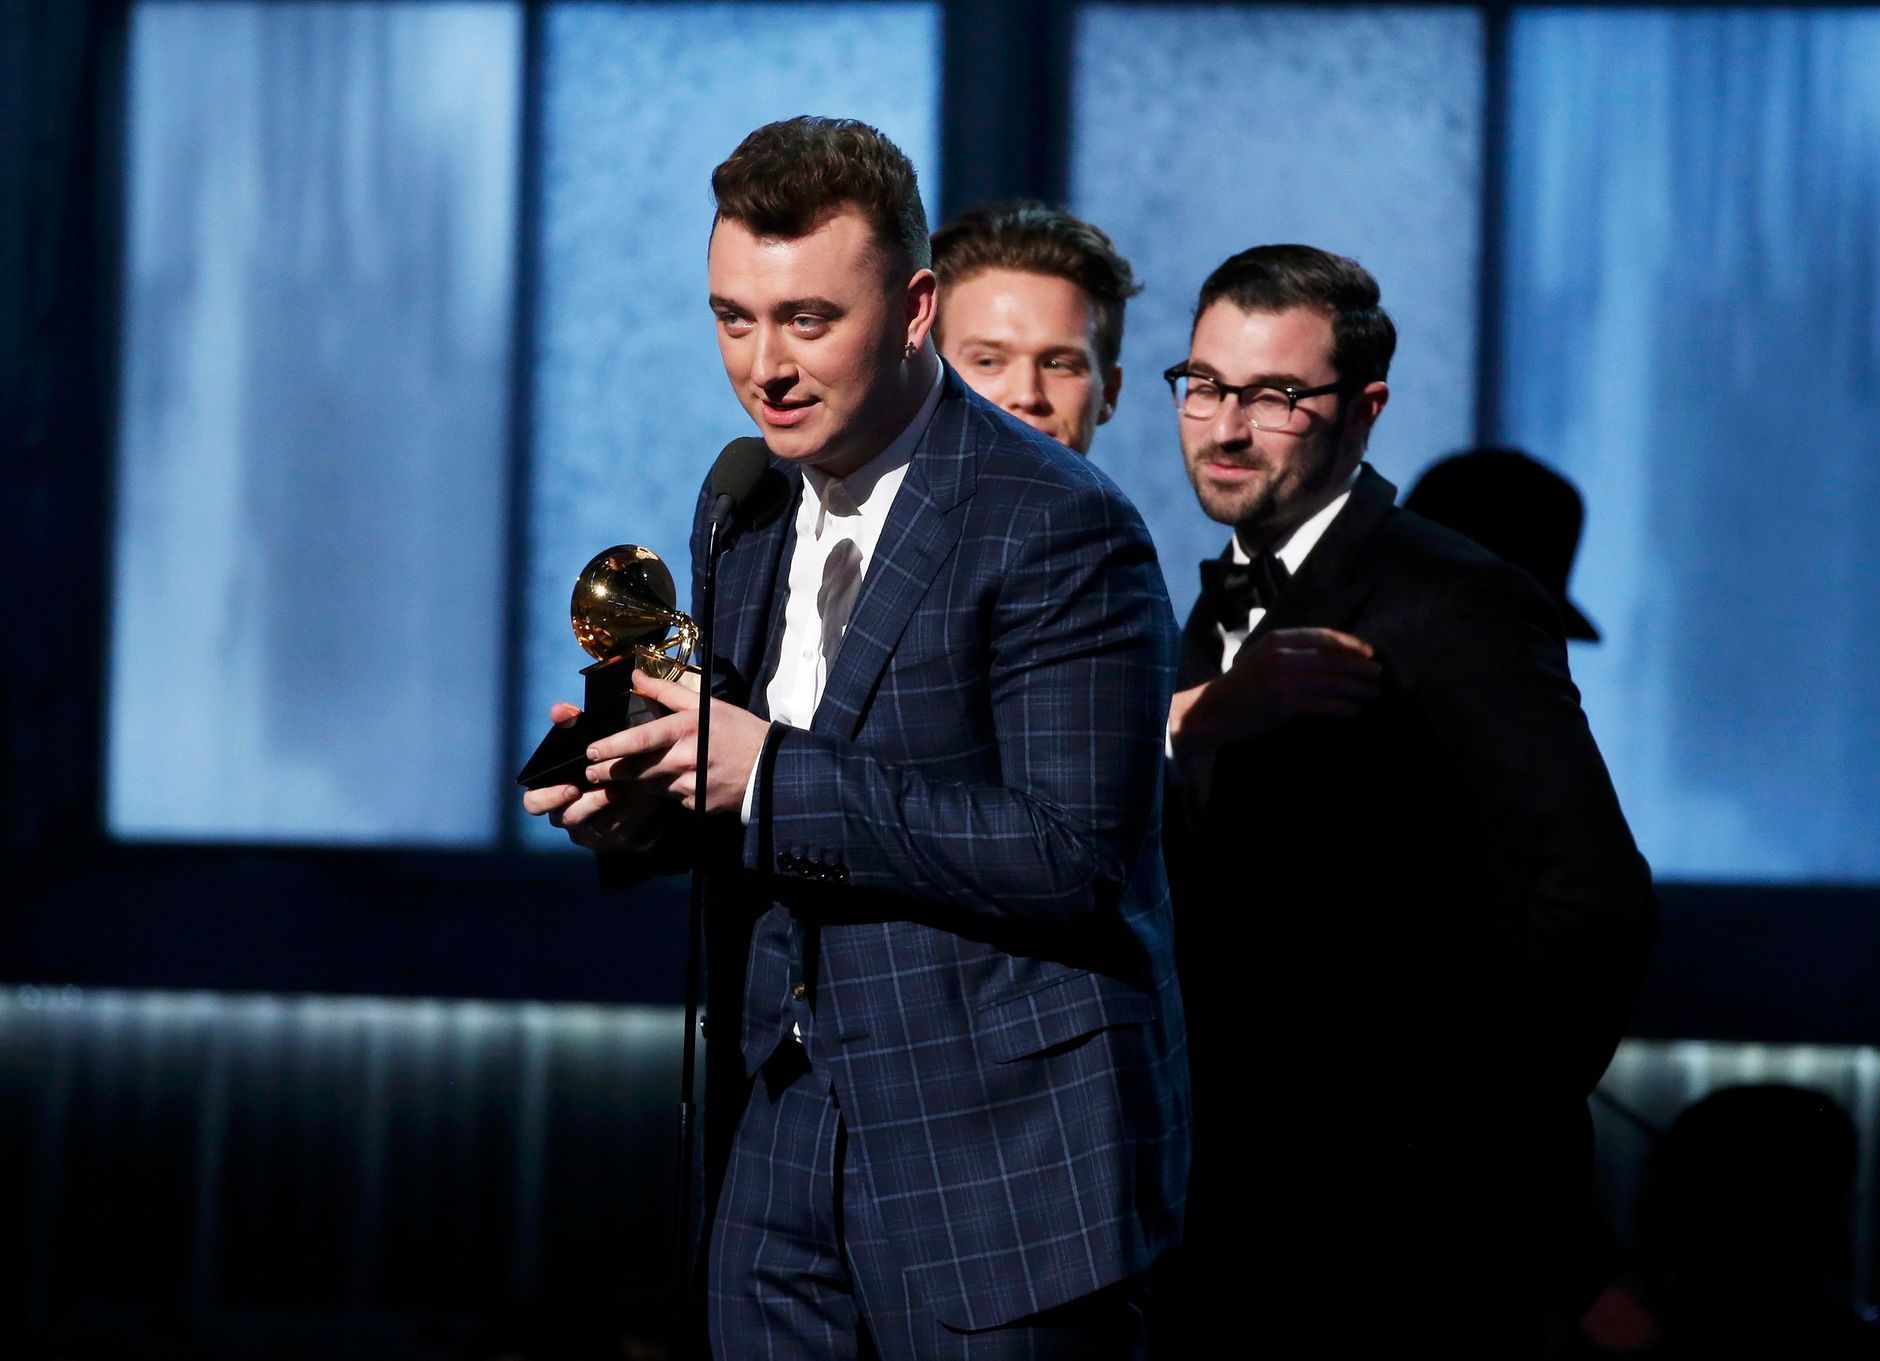 Sam Smith accepts his award during the 57th annual Grammy Awards in Los Angeles